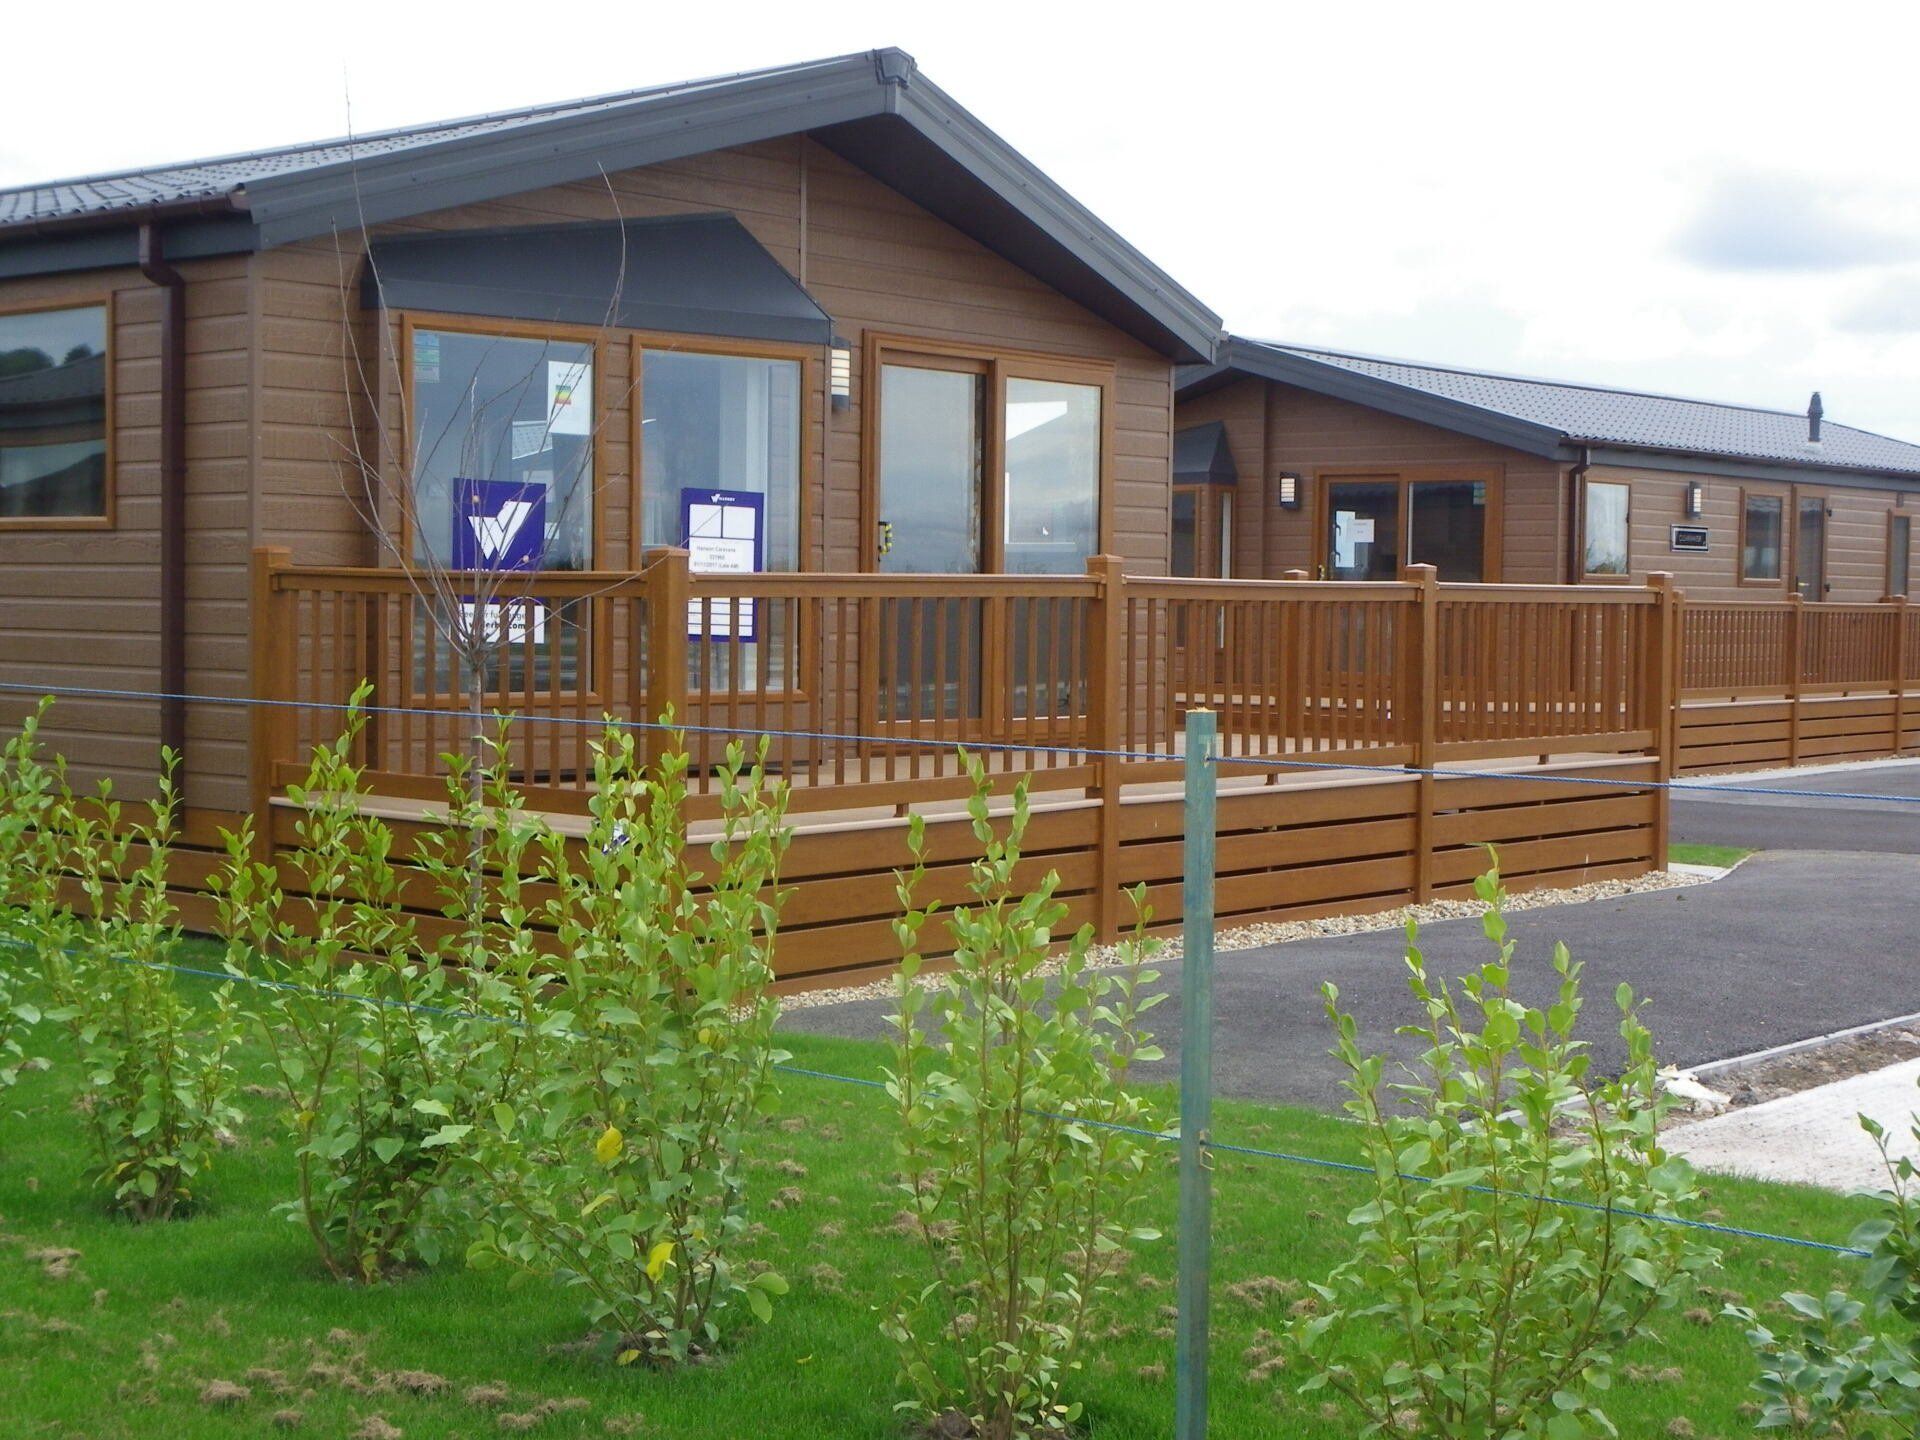 Luxury holiday lodges for sale in Somerset